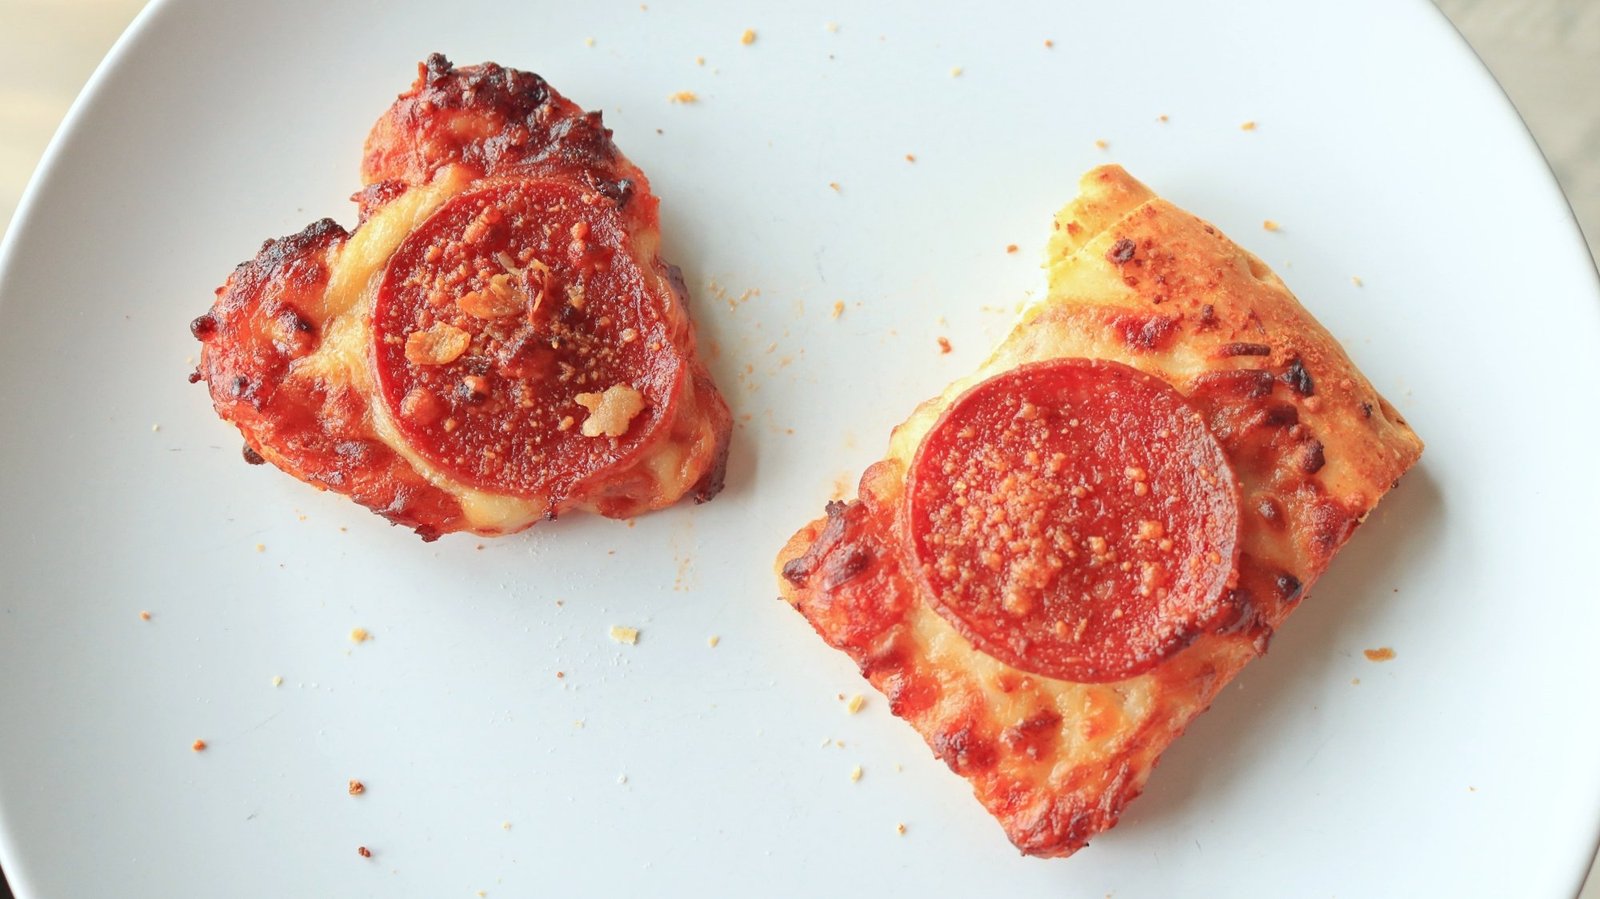 A small heart-shaped pepperoni pizza and a small rectangular slice.